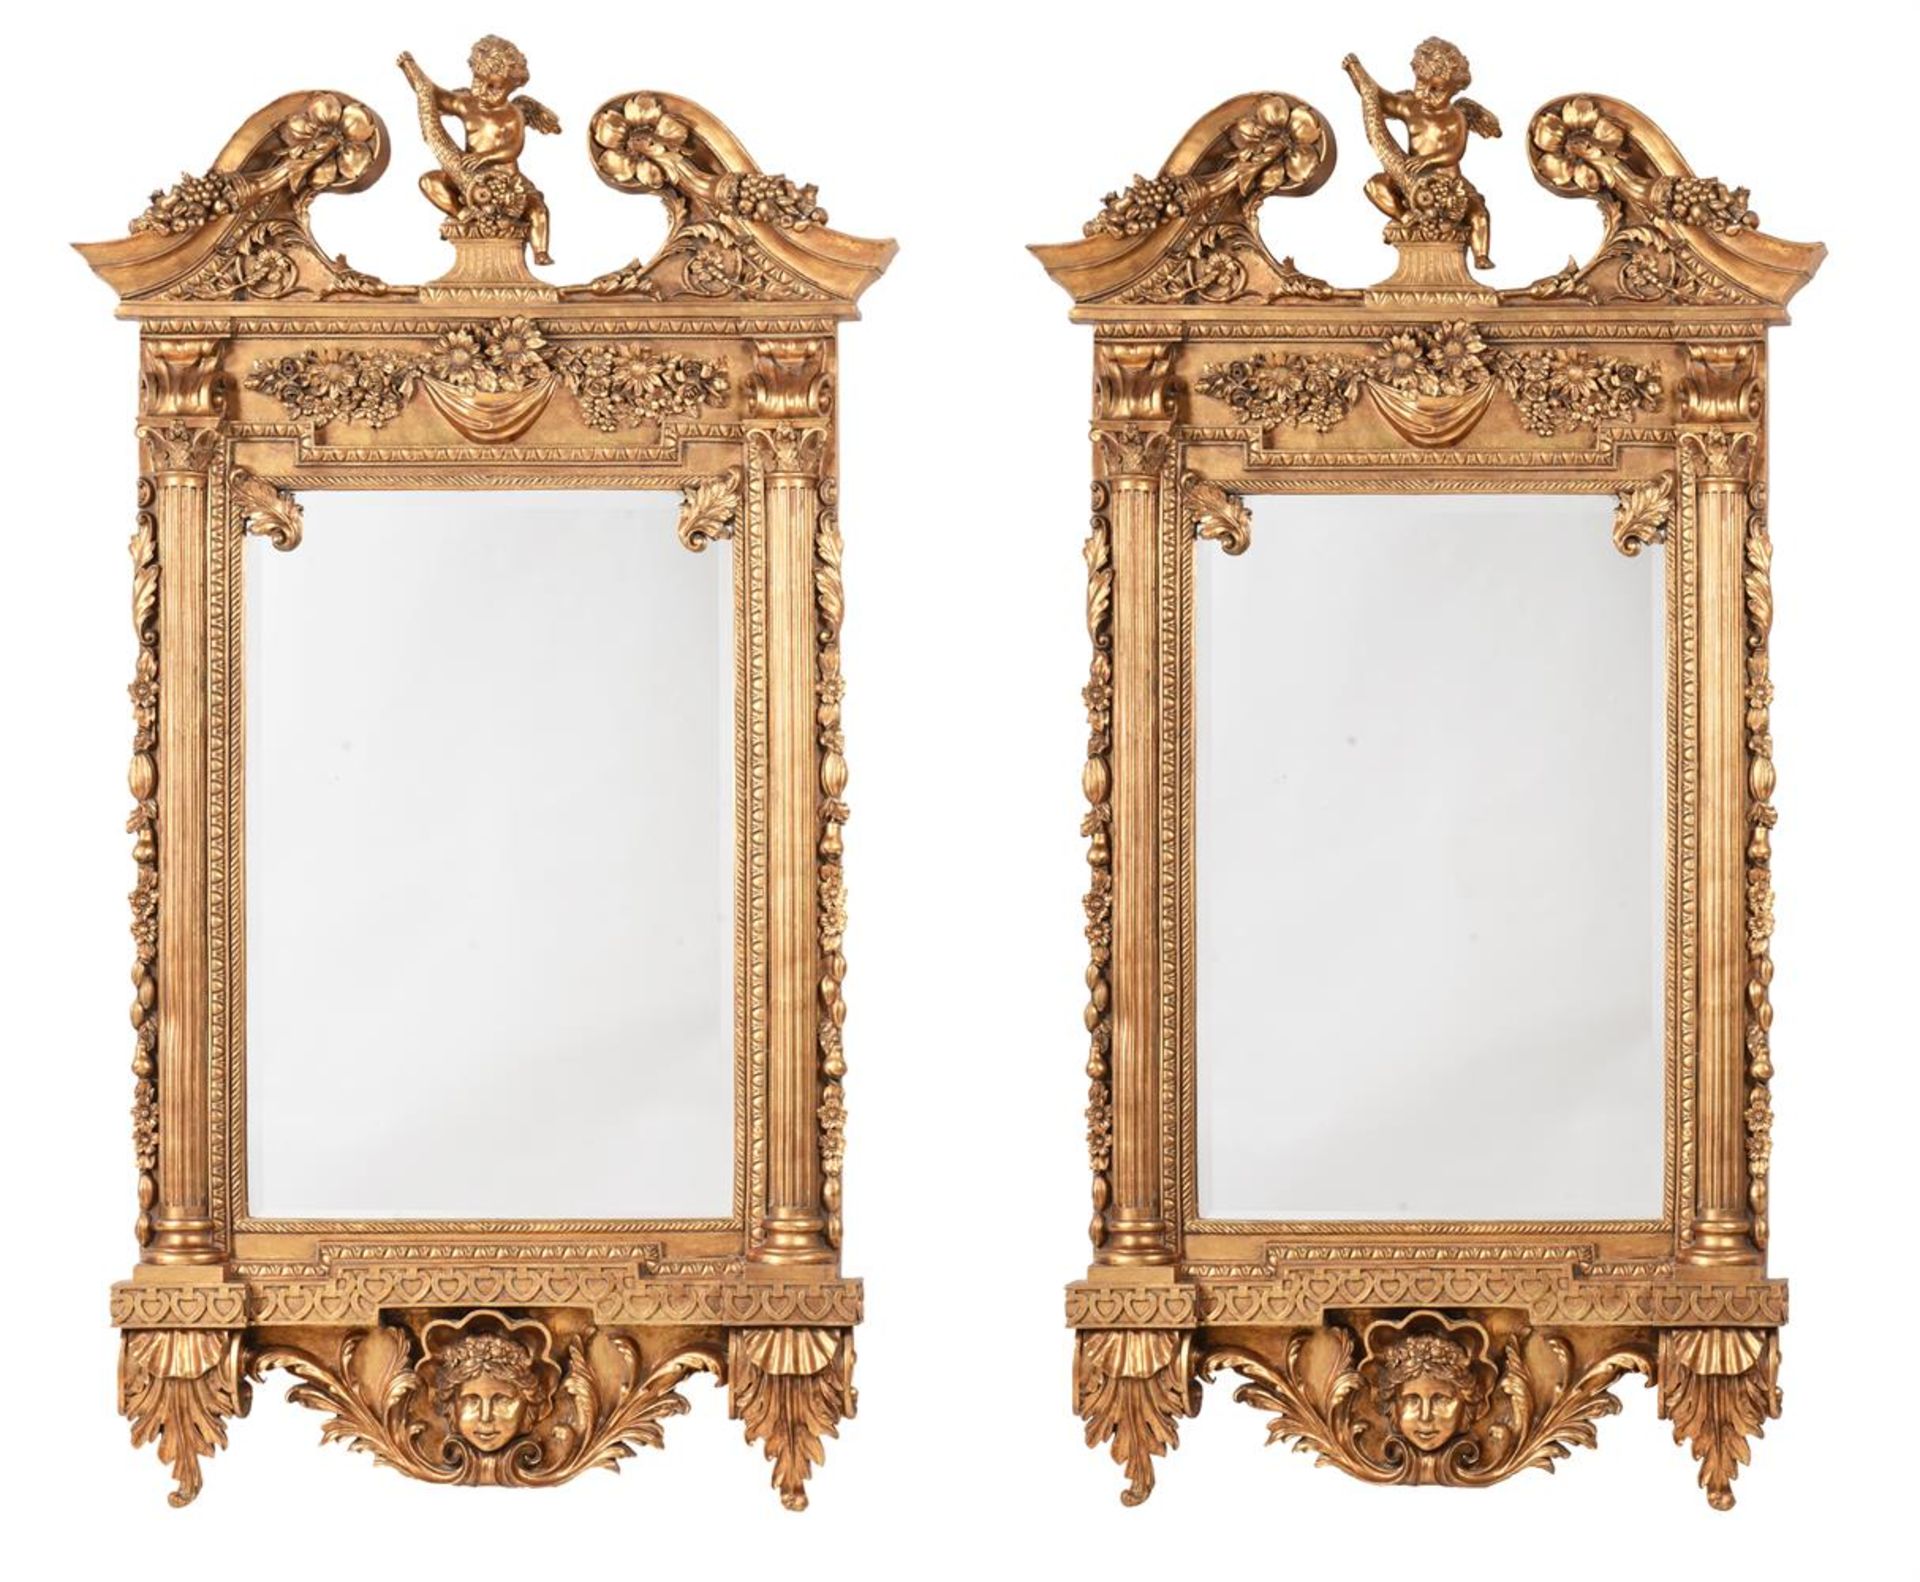 A PAIR OF GILTWOOD WALL MIRRORS IN GEORGE II STYLE